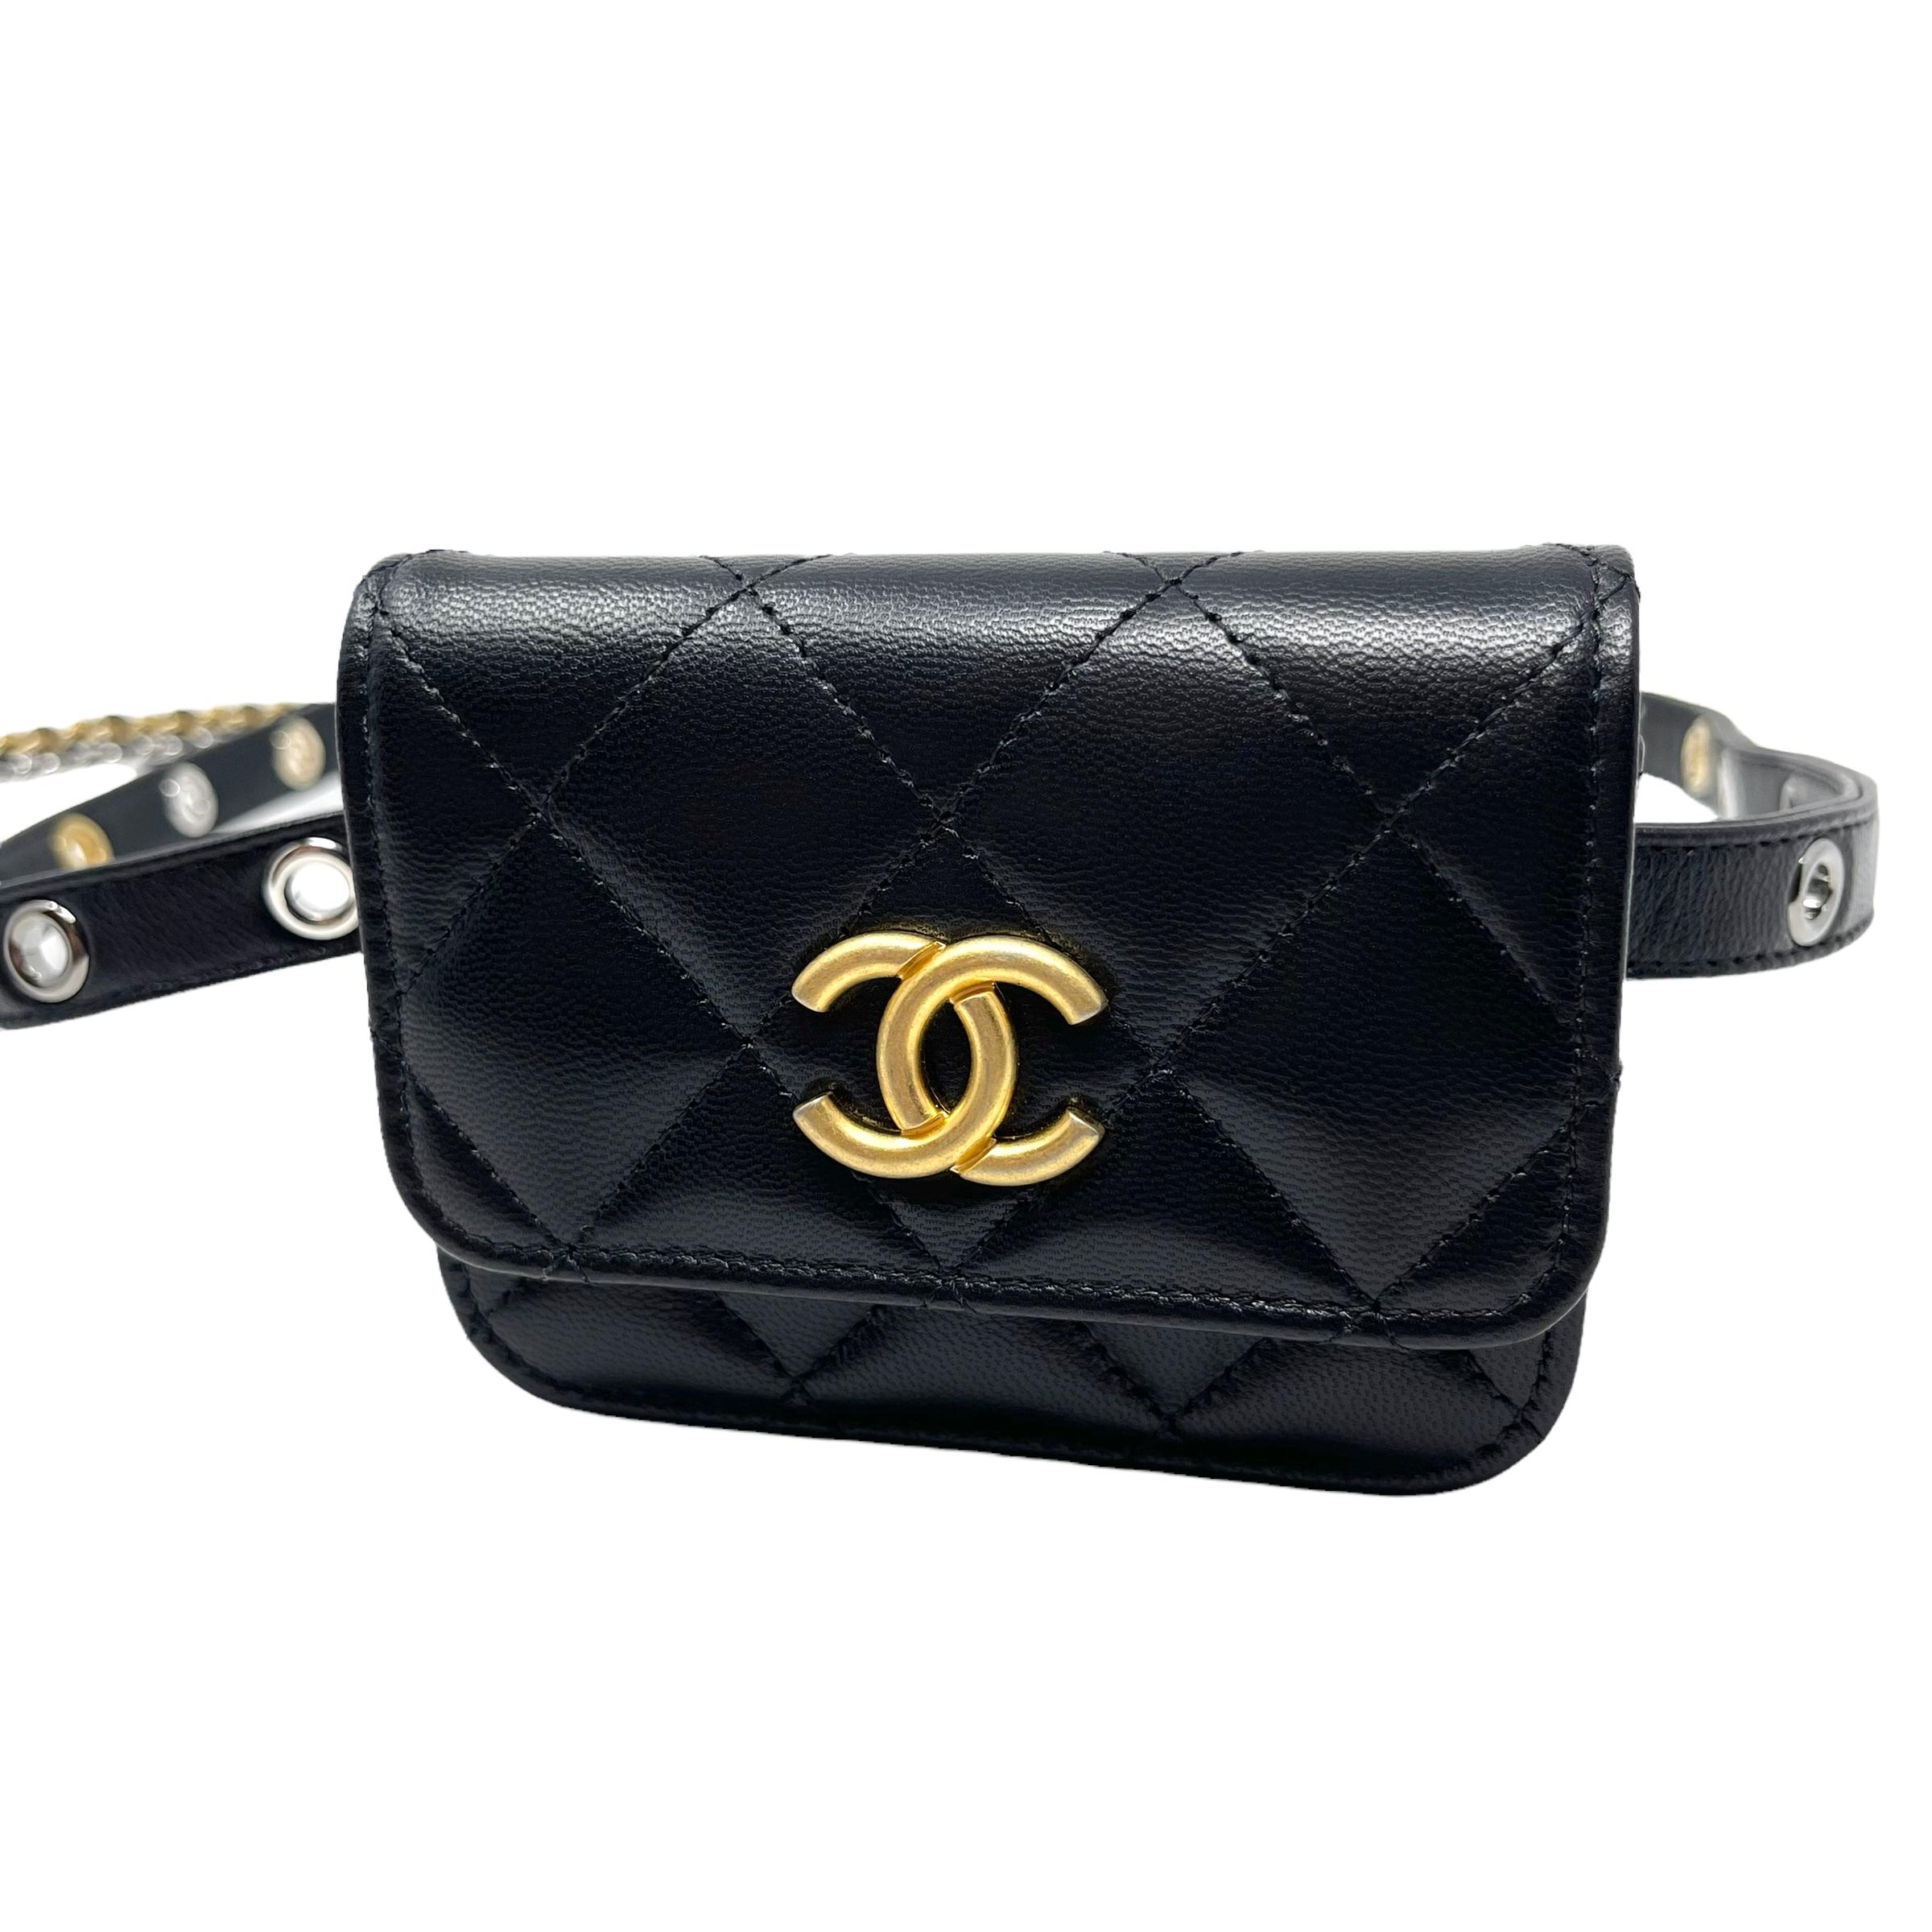 New Chanel Black Quilted Leather Waist Bag Belt Bag

Authenticity Guaranteed

DETAILS
Brand: Chanel
Gender: Women
Category: Waist bag
Condition: Brand new
Color: Black
Material: Leather
Gold CC logo
Gold-tone hardware
Snap button closure
Removable